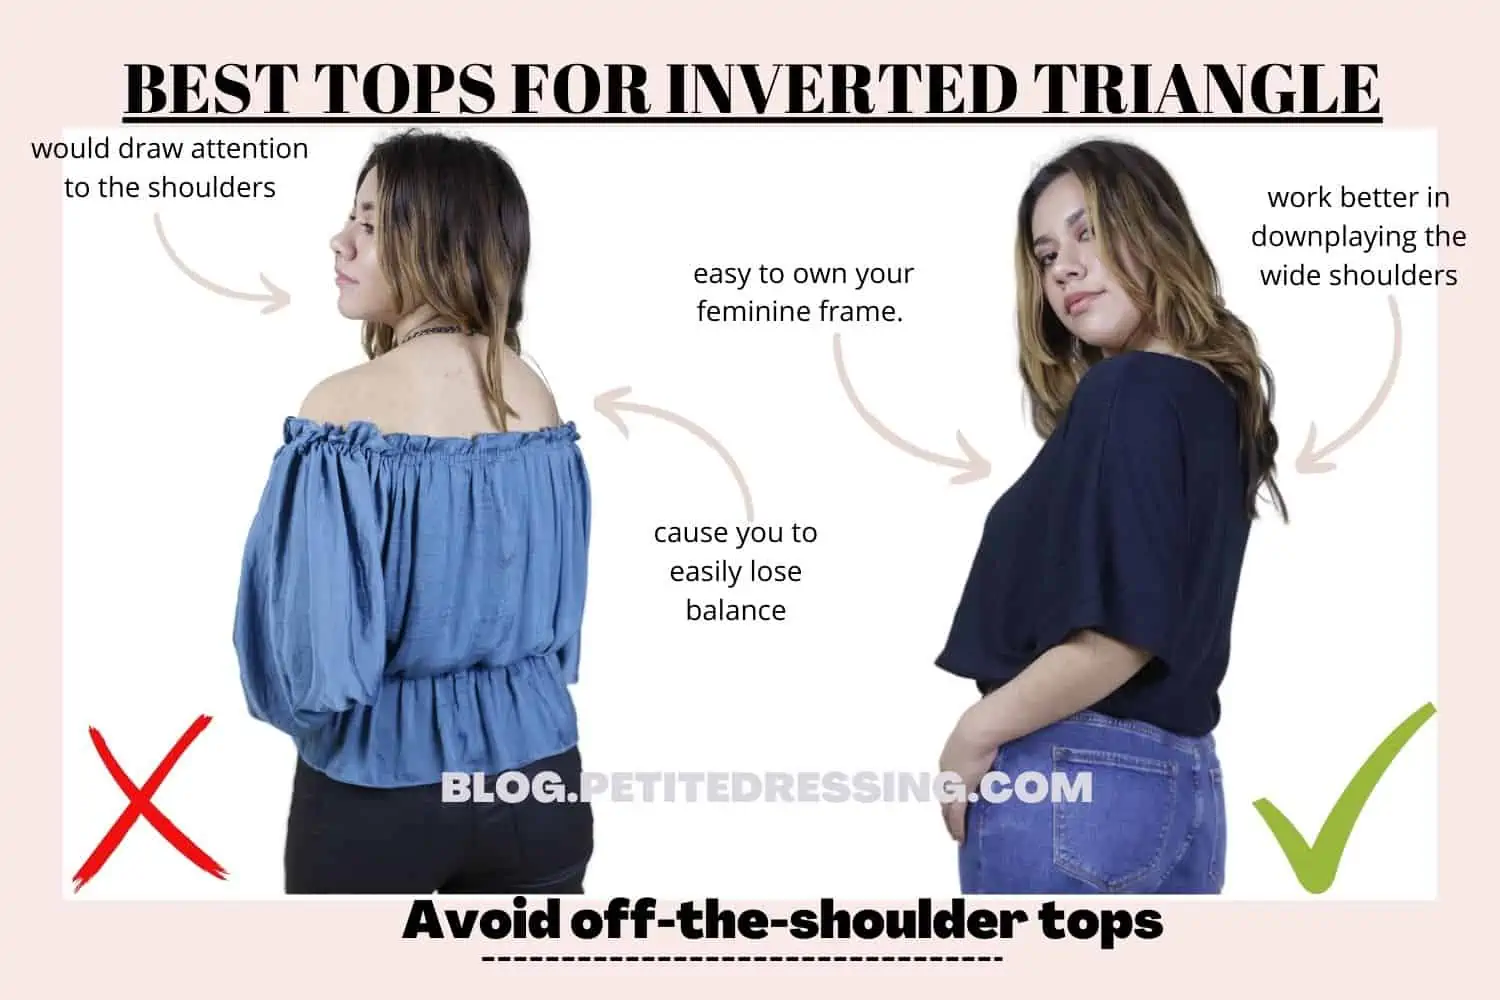 OFF THE SHOULDER TOP IS THE MAIN TOPIC ON THE BLOG